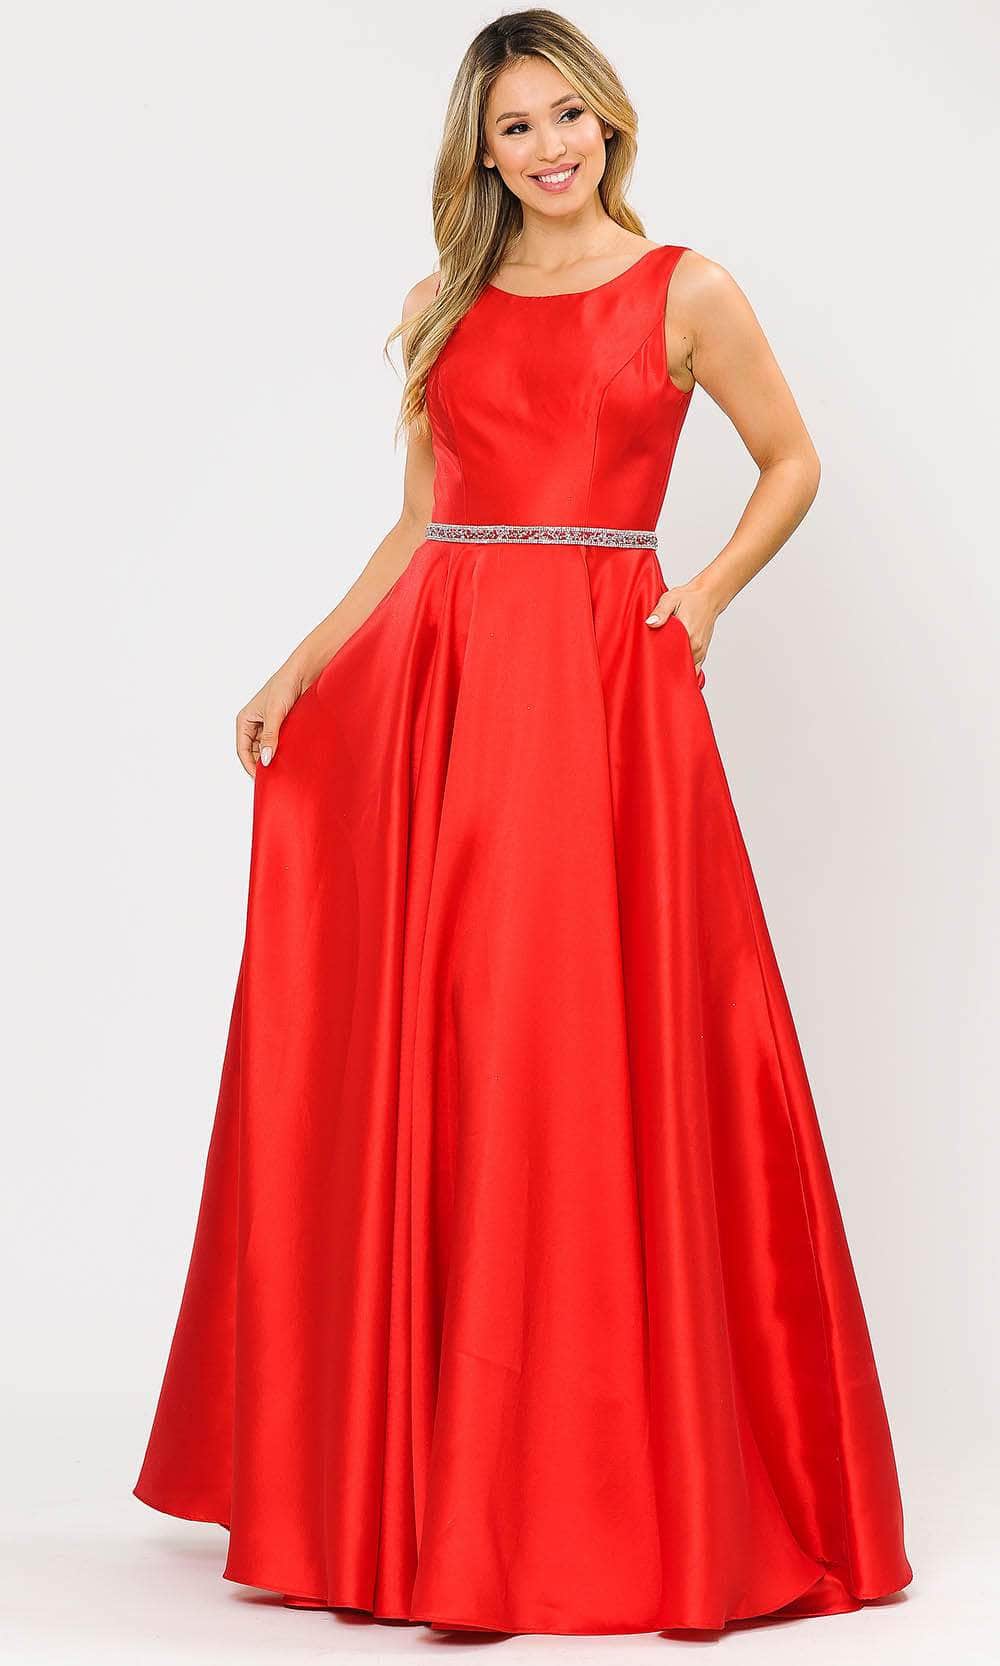 Poly USA 8678 - Sleeveless A-Line Gown
